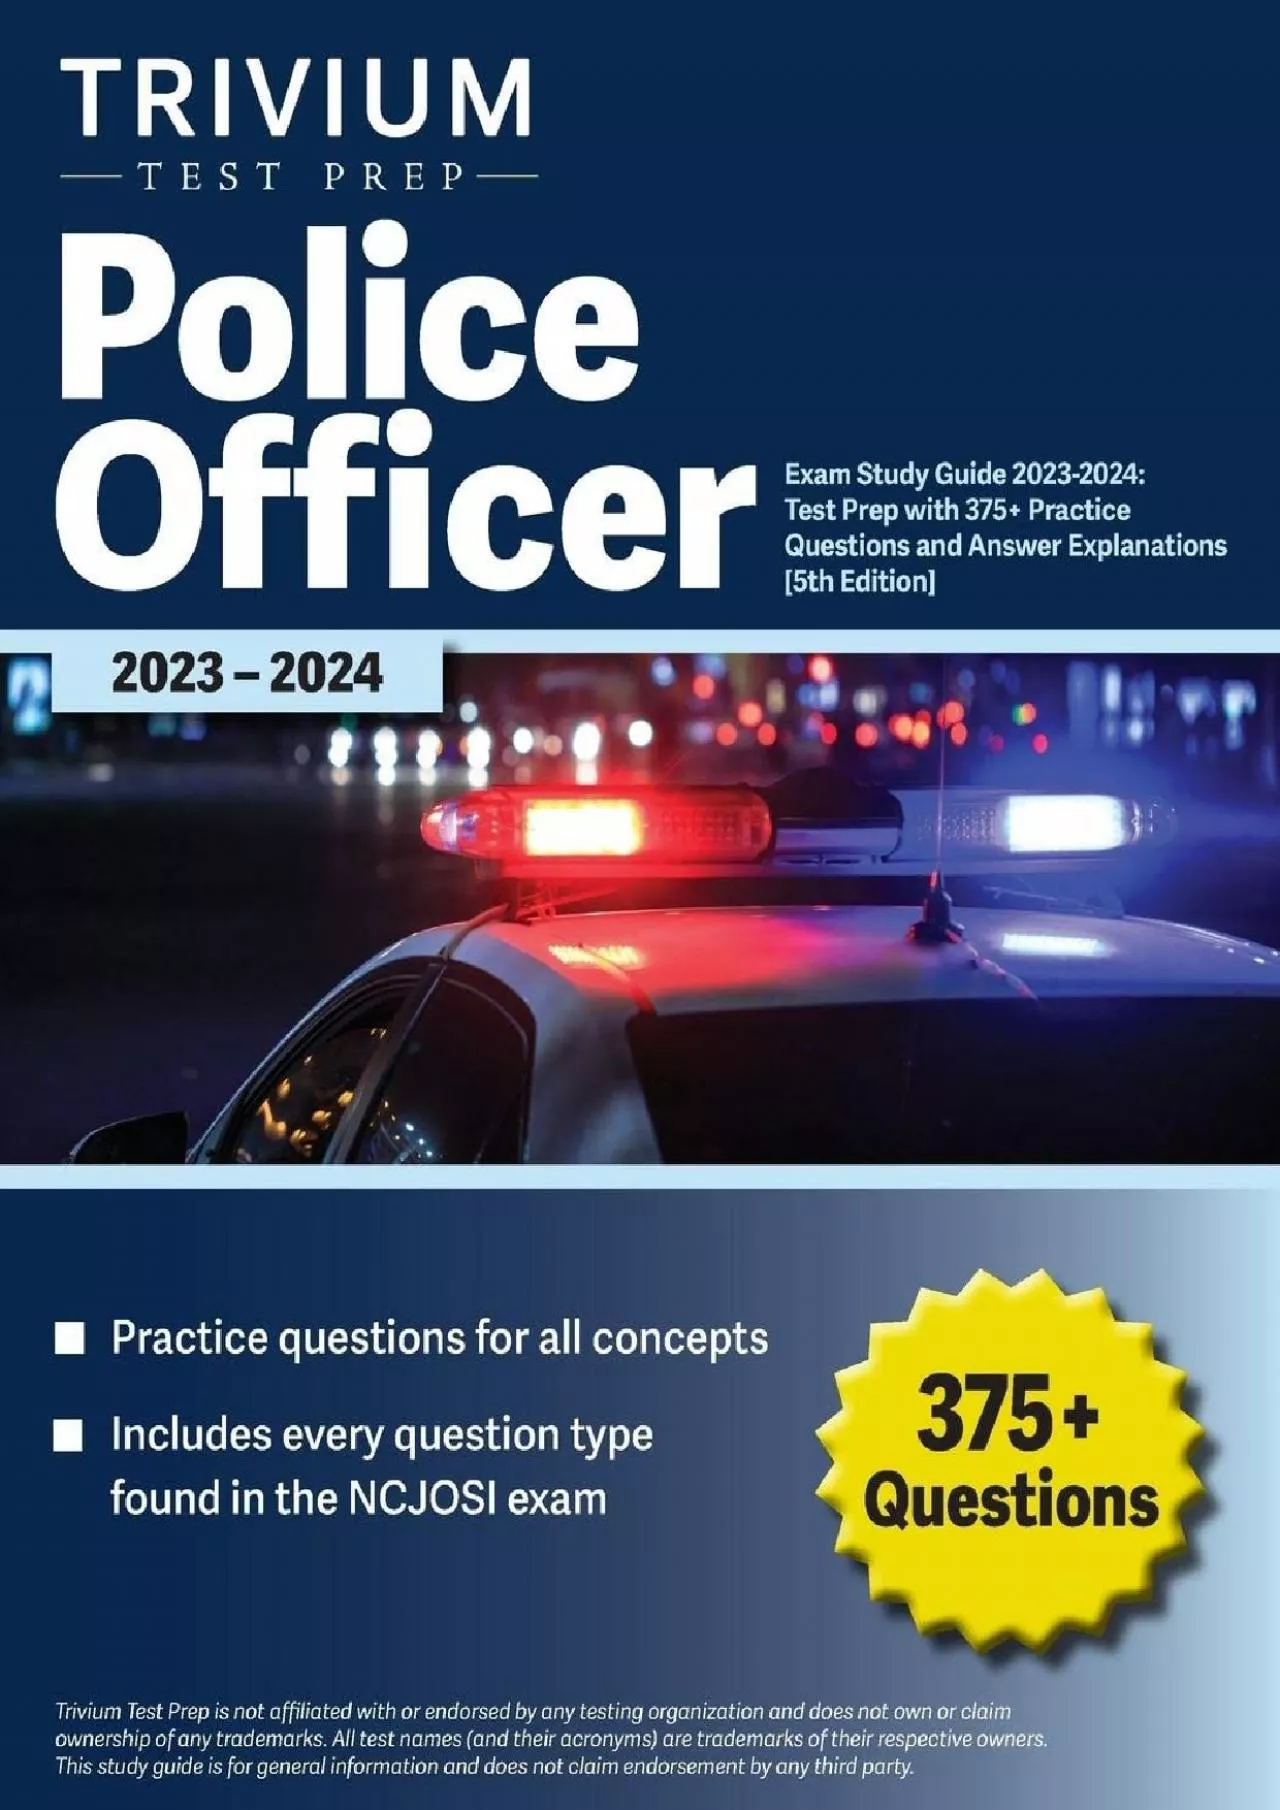 [DOWNLOAD] Police Officer Exam Study Guide 2023-2024: Test Prep with 375+ Practice Questions